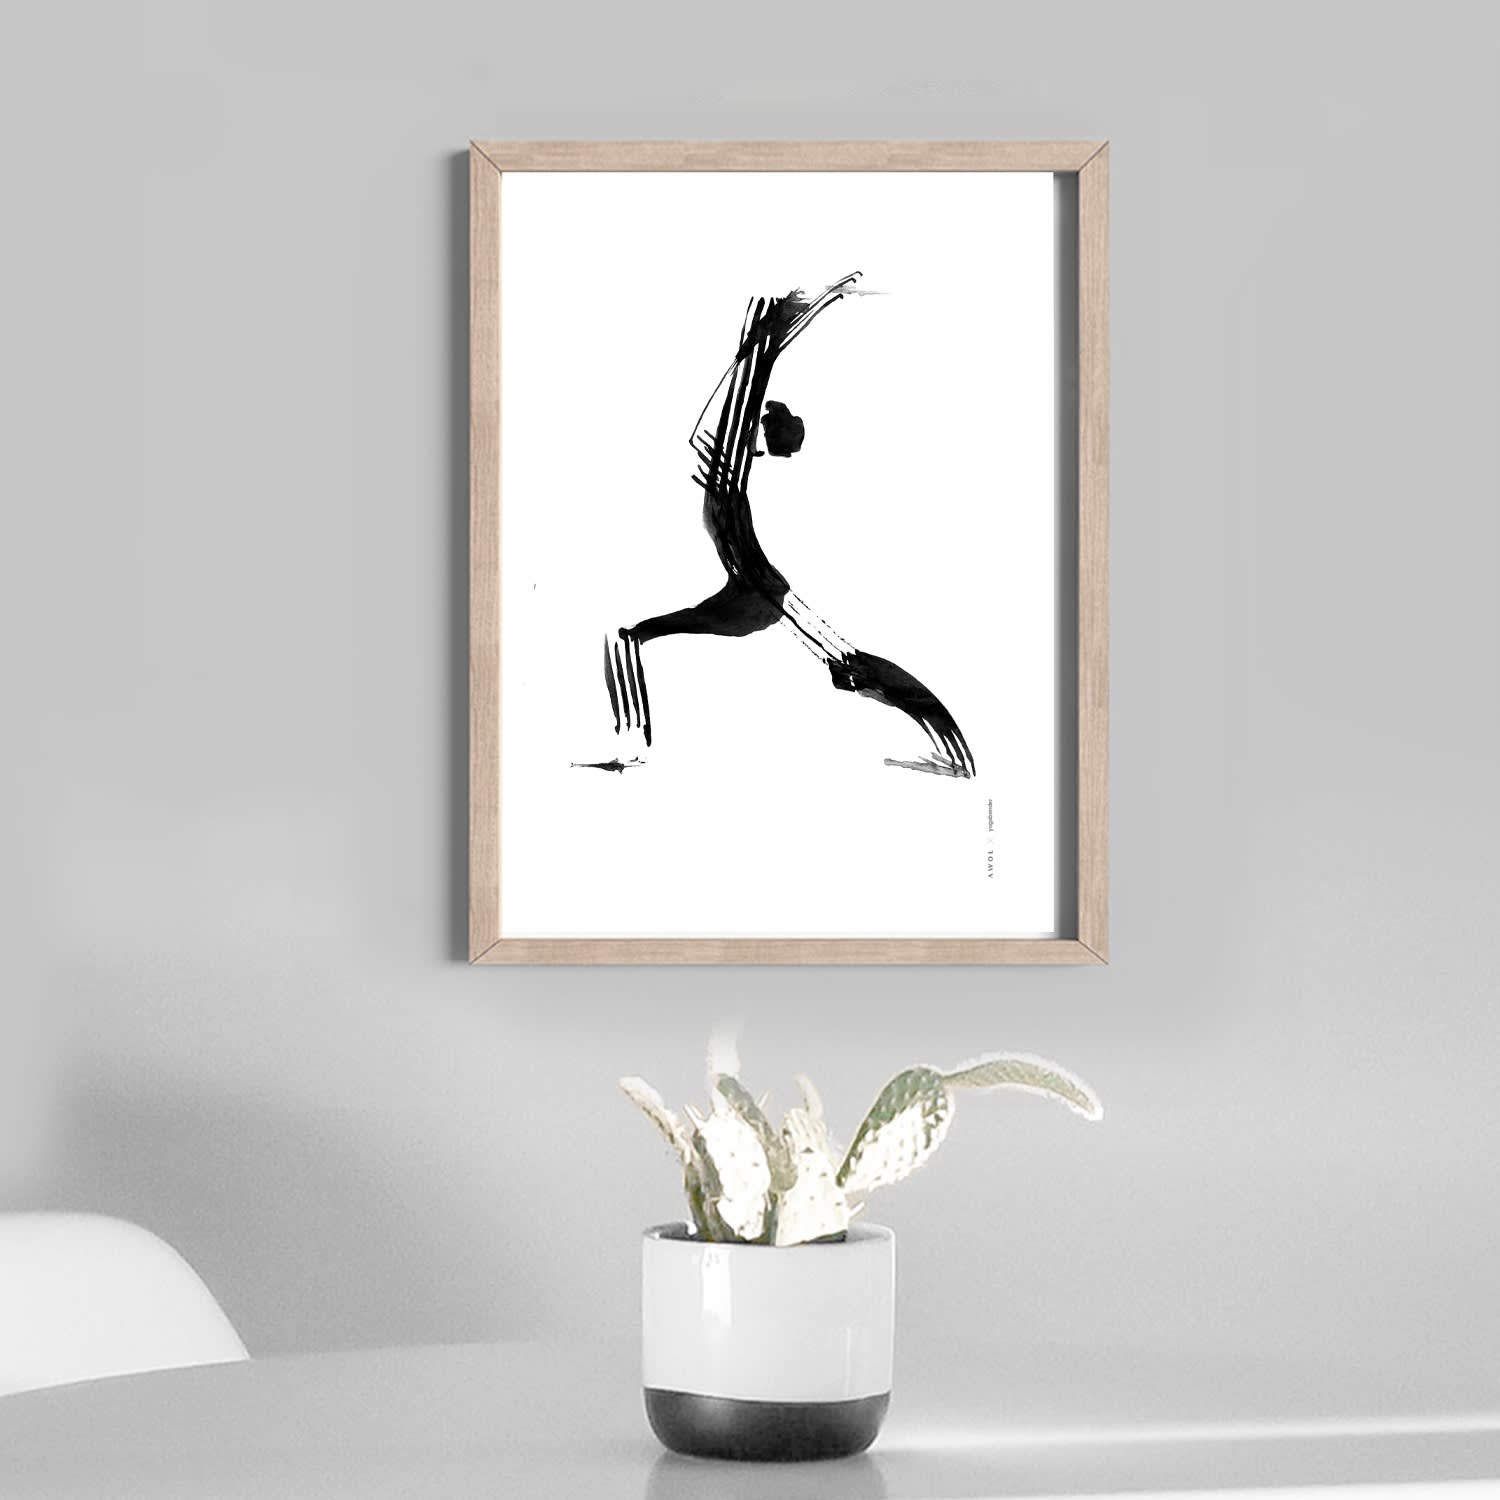 Funny Yoga Art Print With Woman In Yoga Pose Pouring A Bottle Of Wine In A  Glass: Life Is All About Balance Quote, AWOL